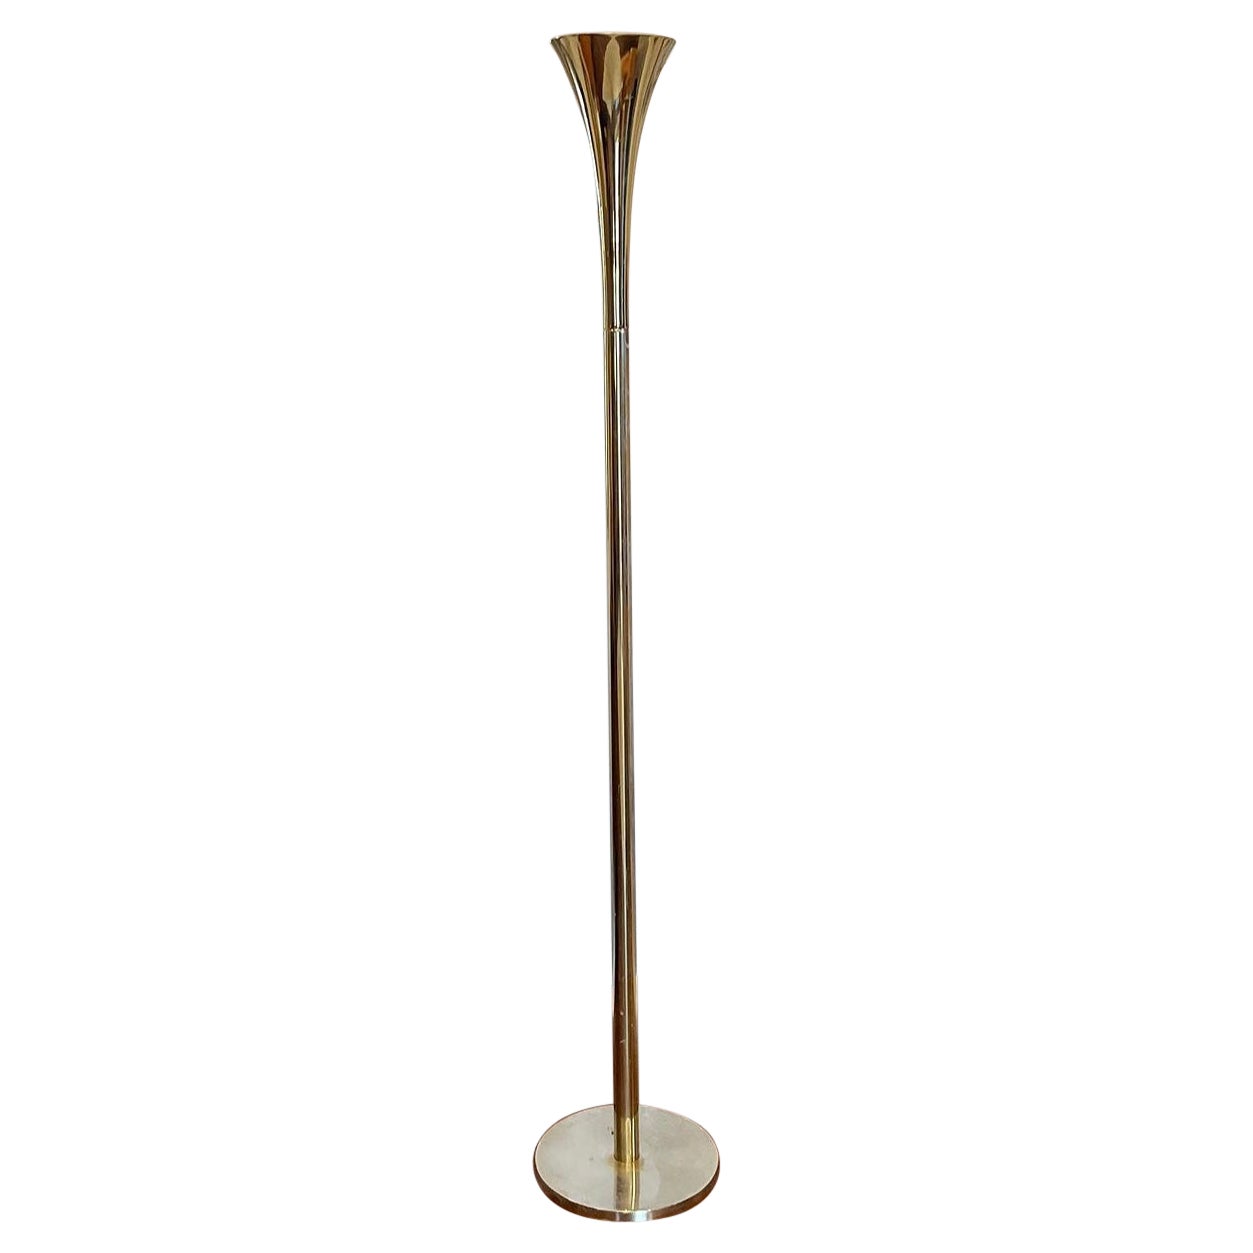 Vintage mid century brass torchiere tall floor lamp by Laurel Lamp Company